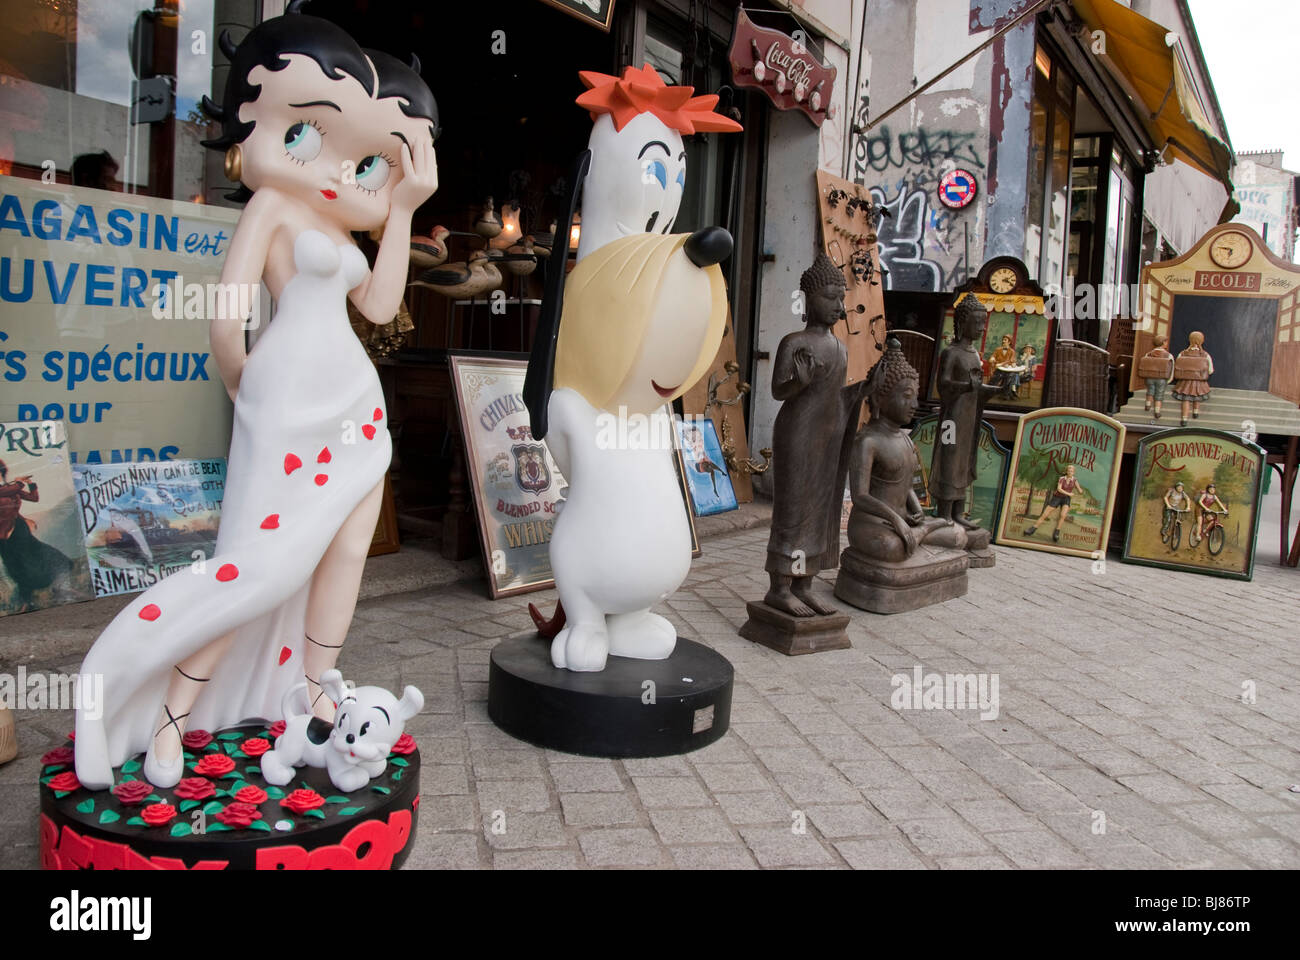 Paris, France, Shopping, Clignancourt Flea Market,, Antique Vintage Market, Old French Kitsch Statues Outside Shop, Display, Betty Boop Stock Photo